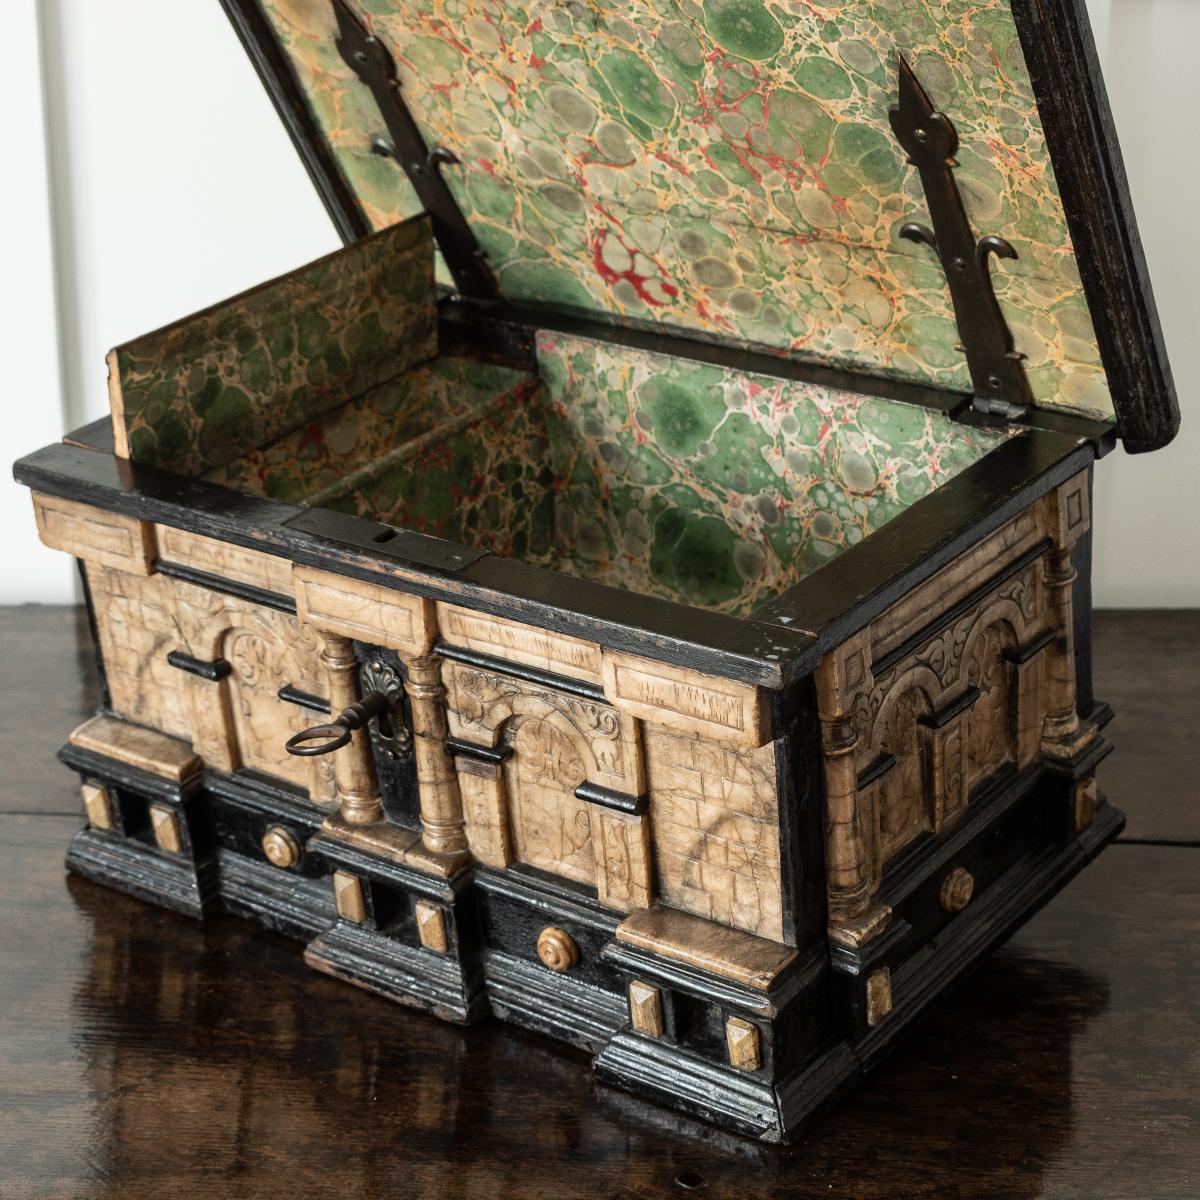 An early 17th century ebonised and alabaster table casket, Malines (Mechelen), circa 1630